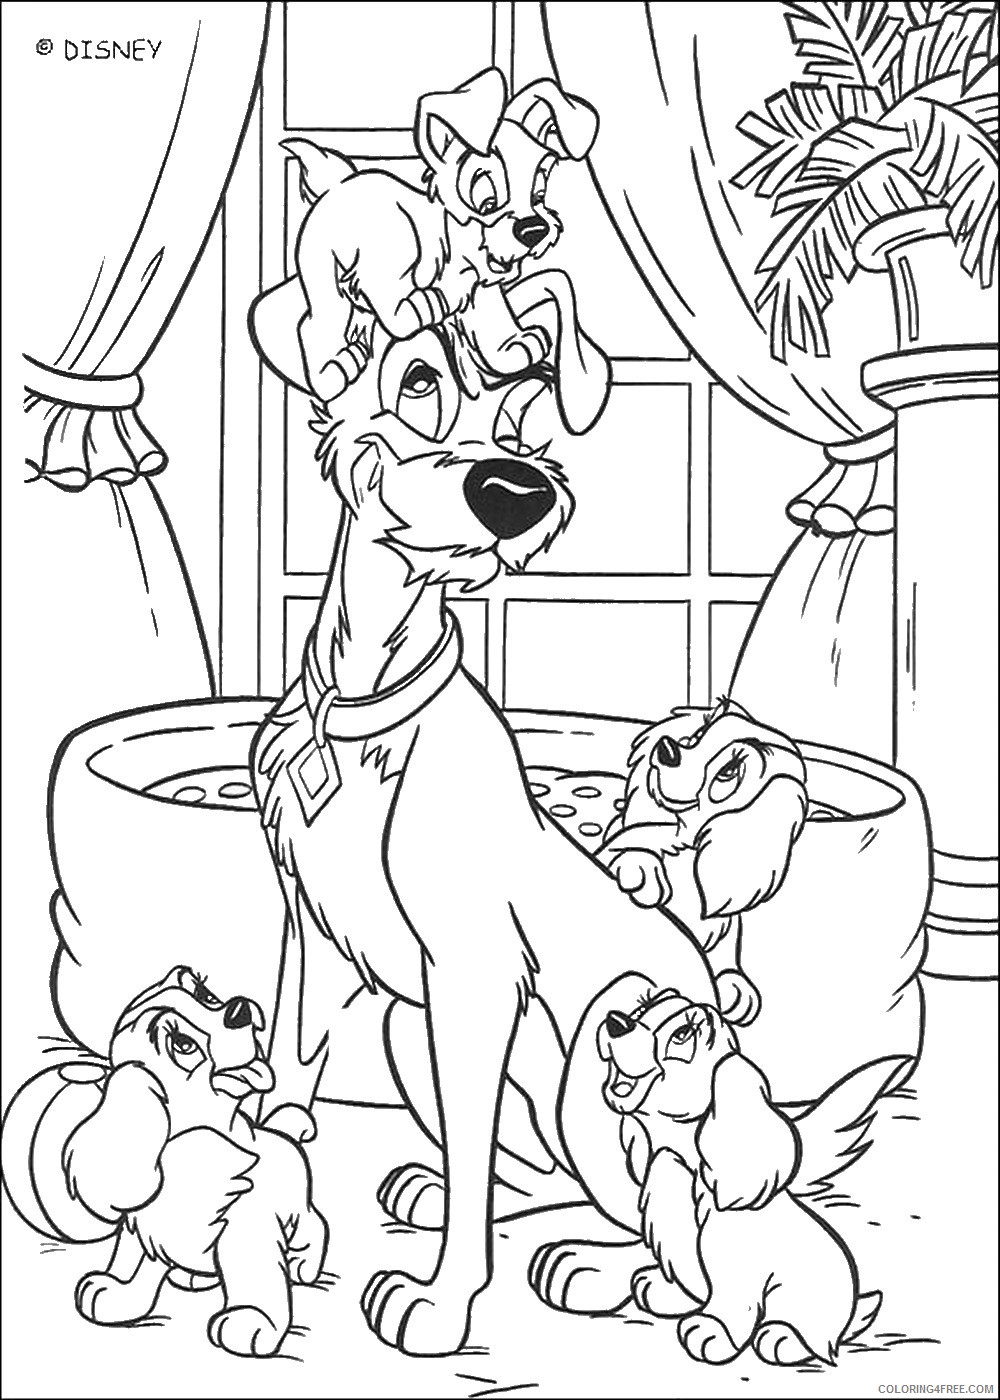 Lady and the Tramp Coloring Pages Cartoons lady tramp_cl09 Printable 2020 3609 Coloring4free